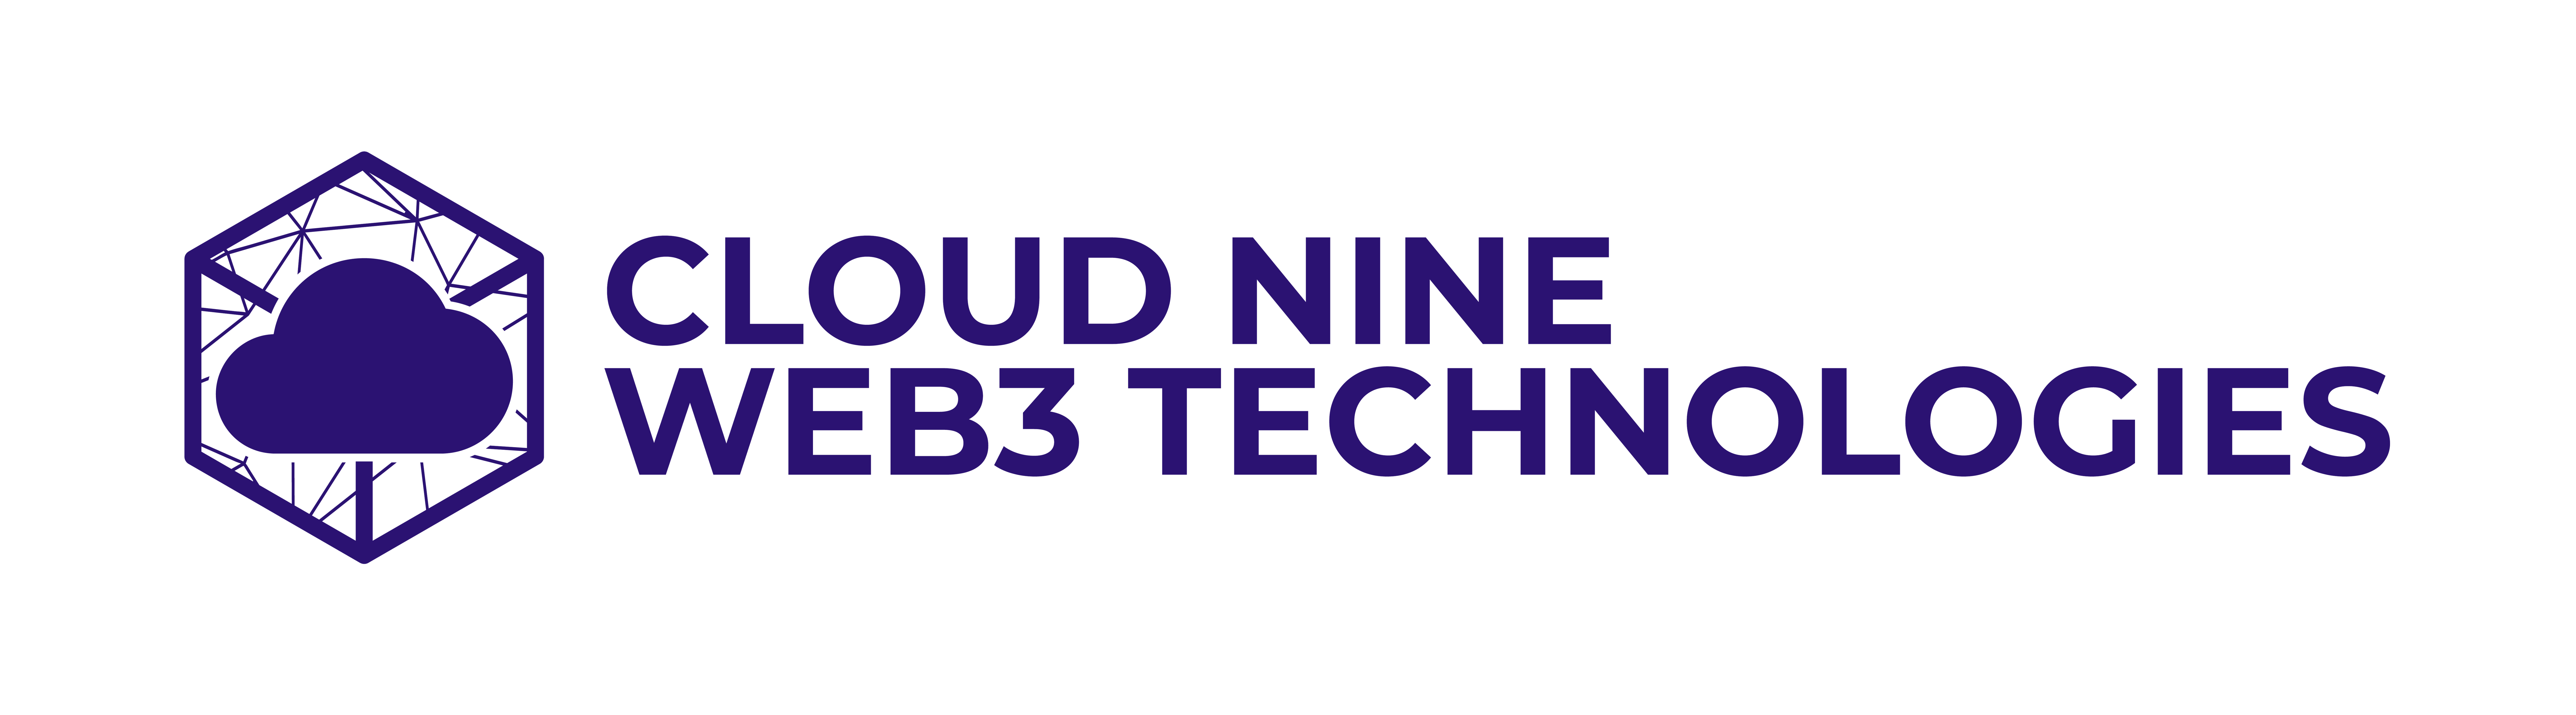 Cloud Nine Appointed Anthony Zelen to the Board of Directors